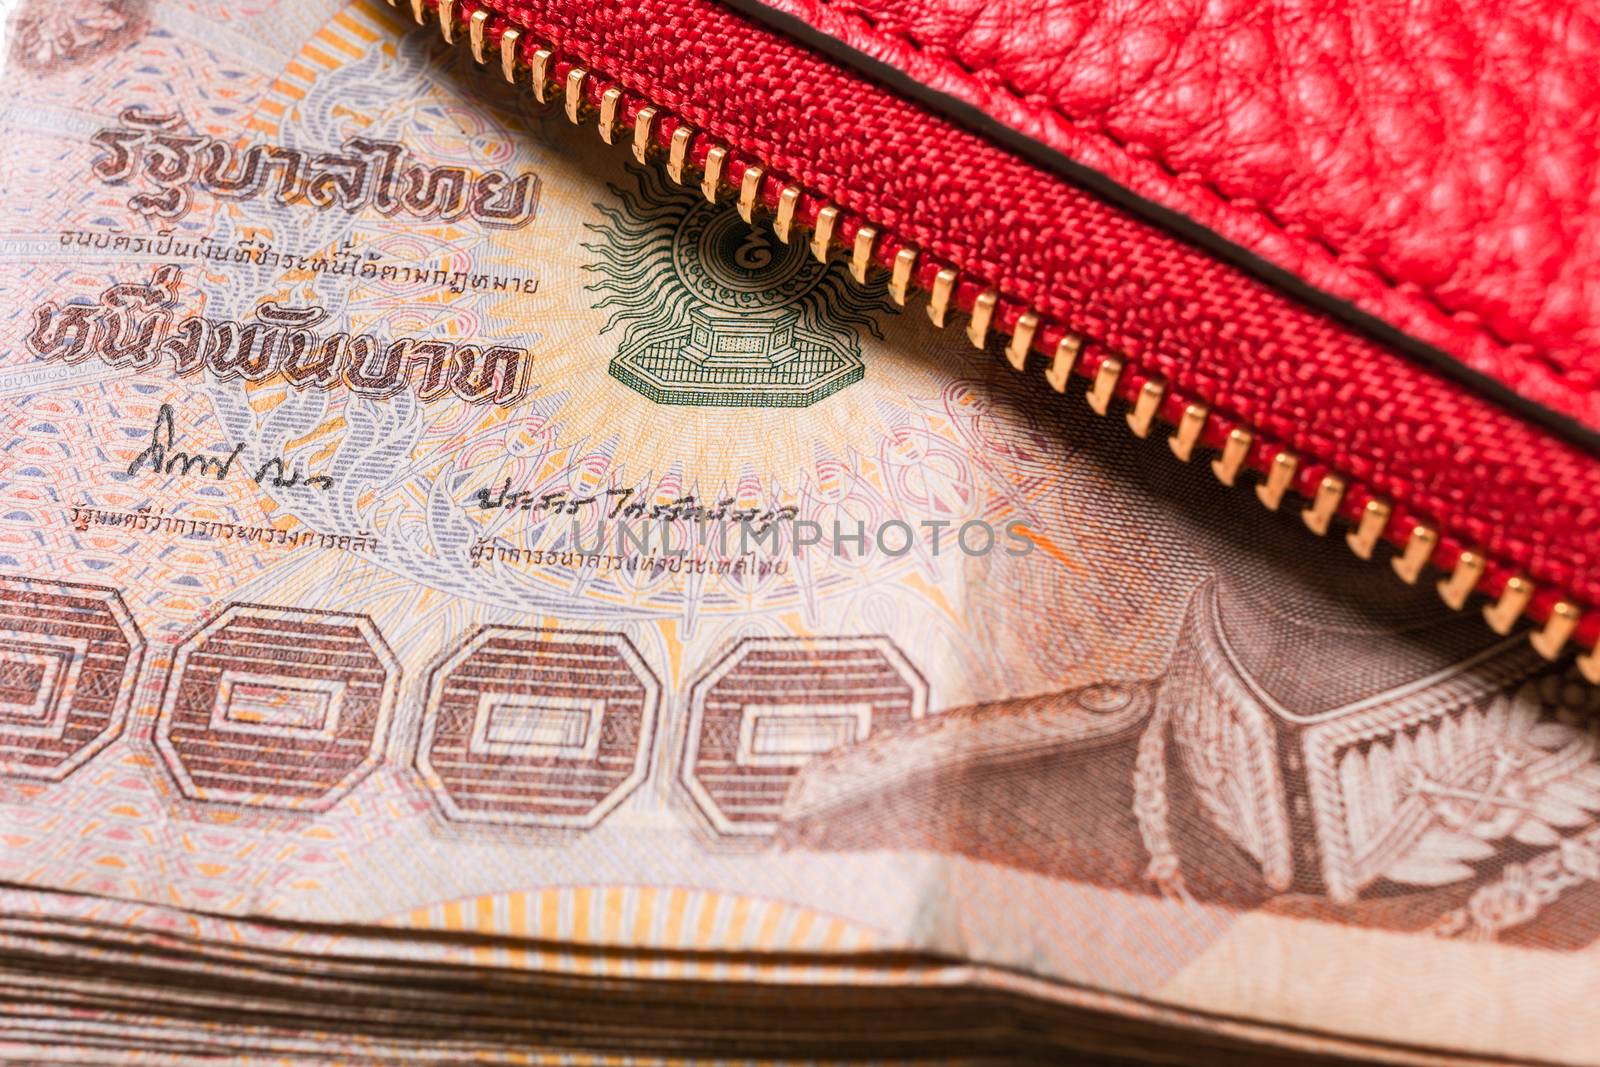 red leather wallet with thai banknote money, close up